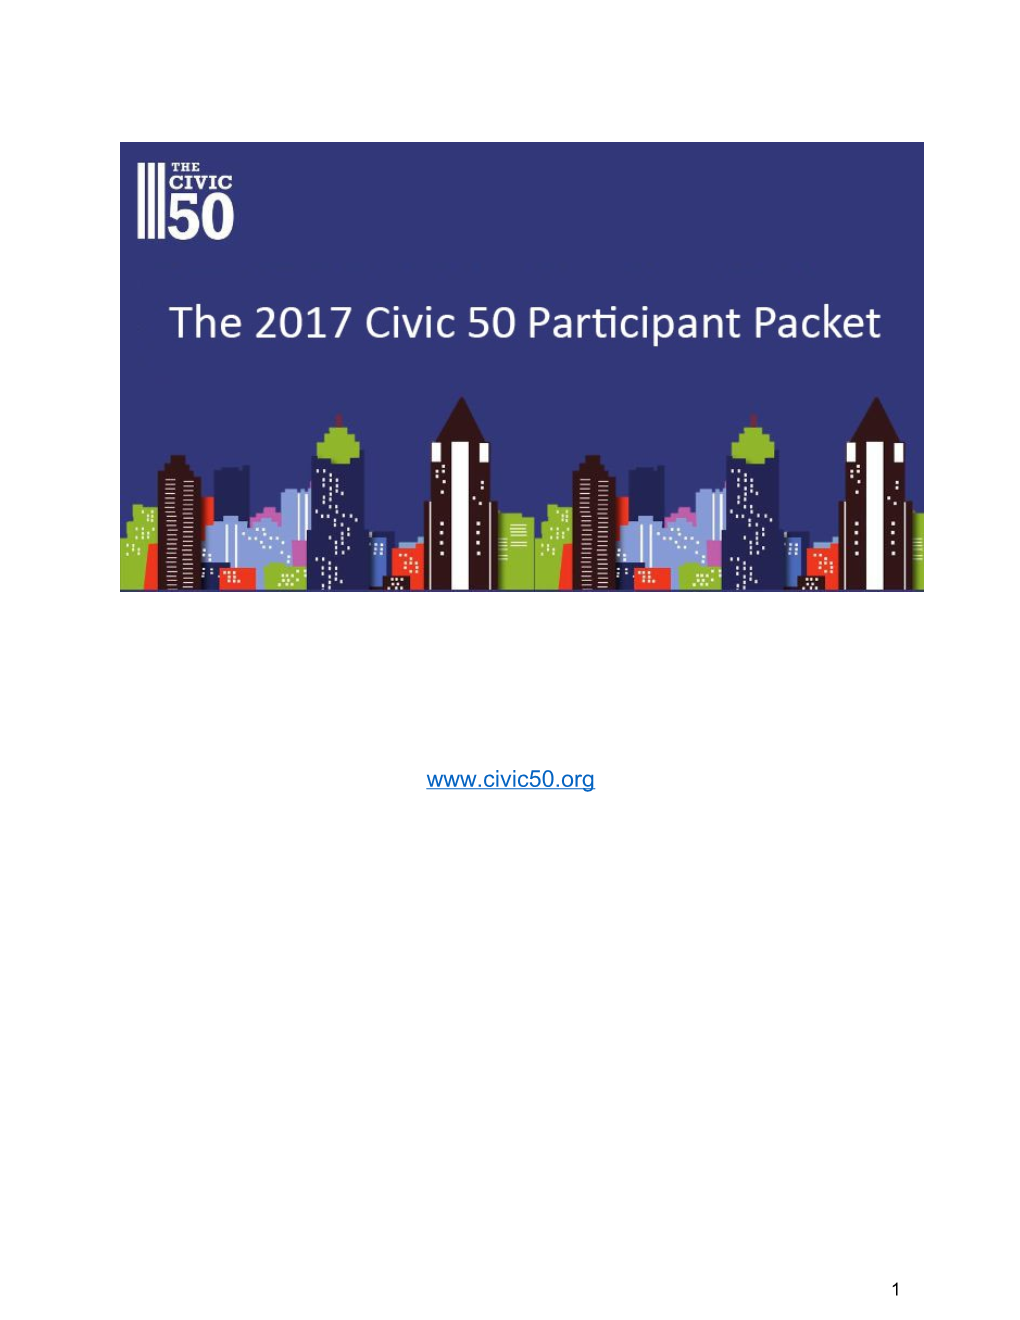 2017 Civic 50 Participant Briefing Packet